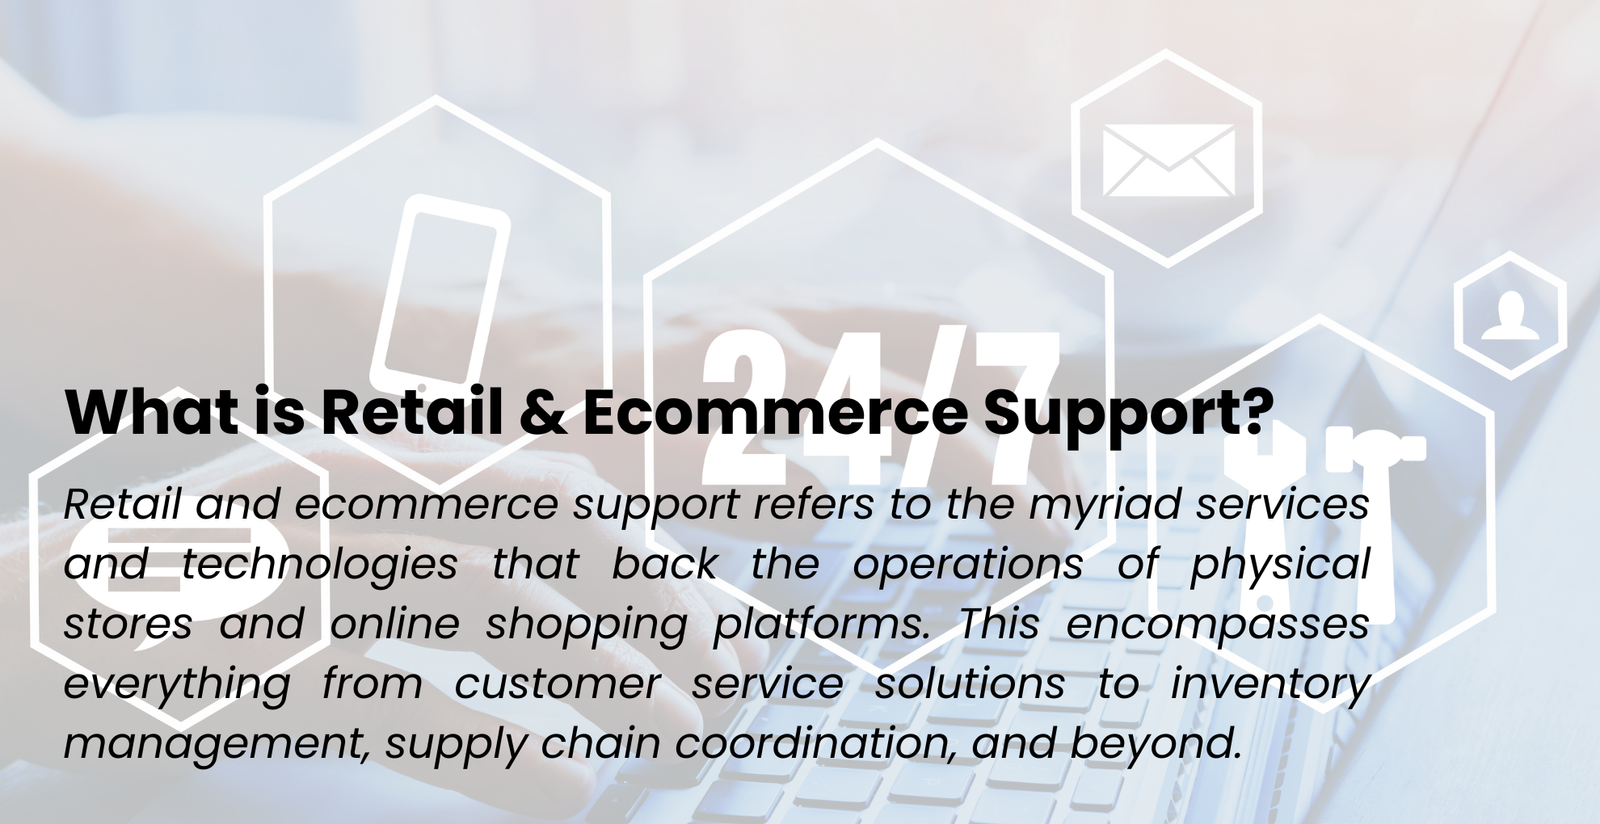 Retail & Ecommerce Support